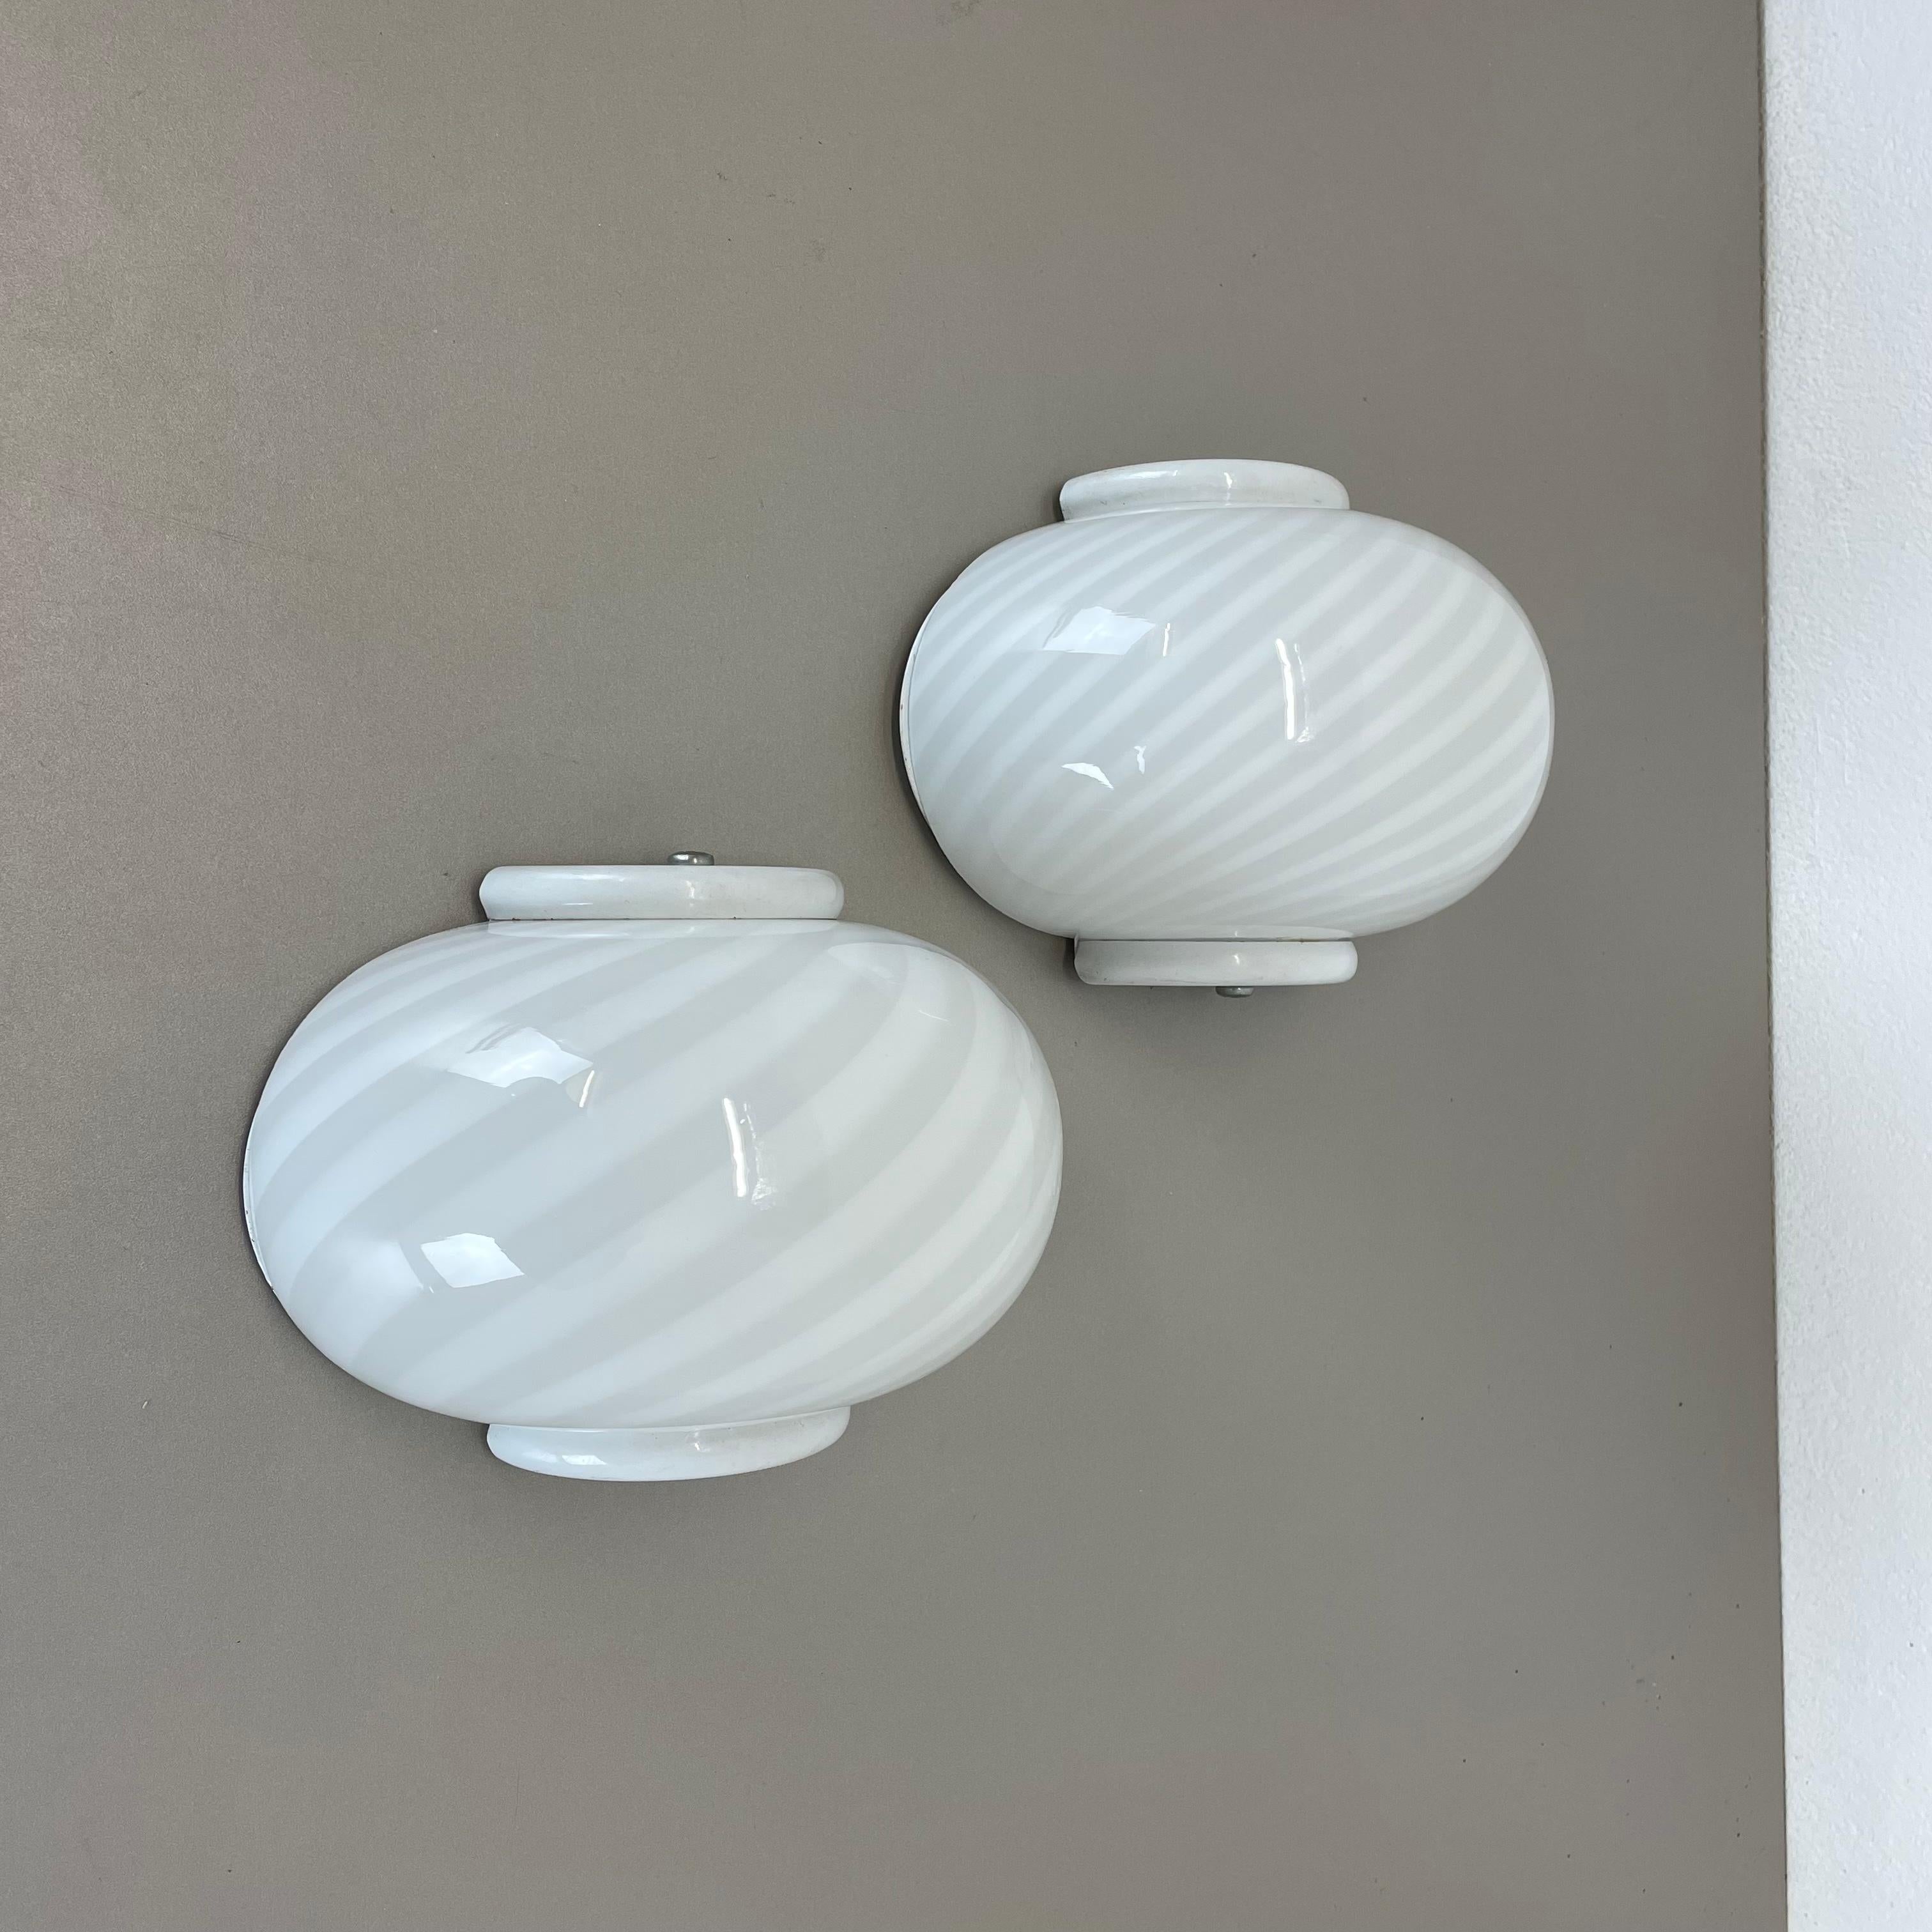 Article:

Set of two

Wall light sconces


Origin:

Italy


Producer:

Murano Vetri, Italy



Age:

1980s



This set of two modernist lights was produced in Italy in the 1980s. It is made from italian murano glass and has a